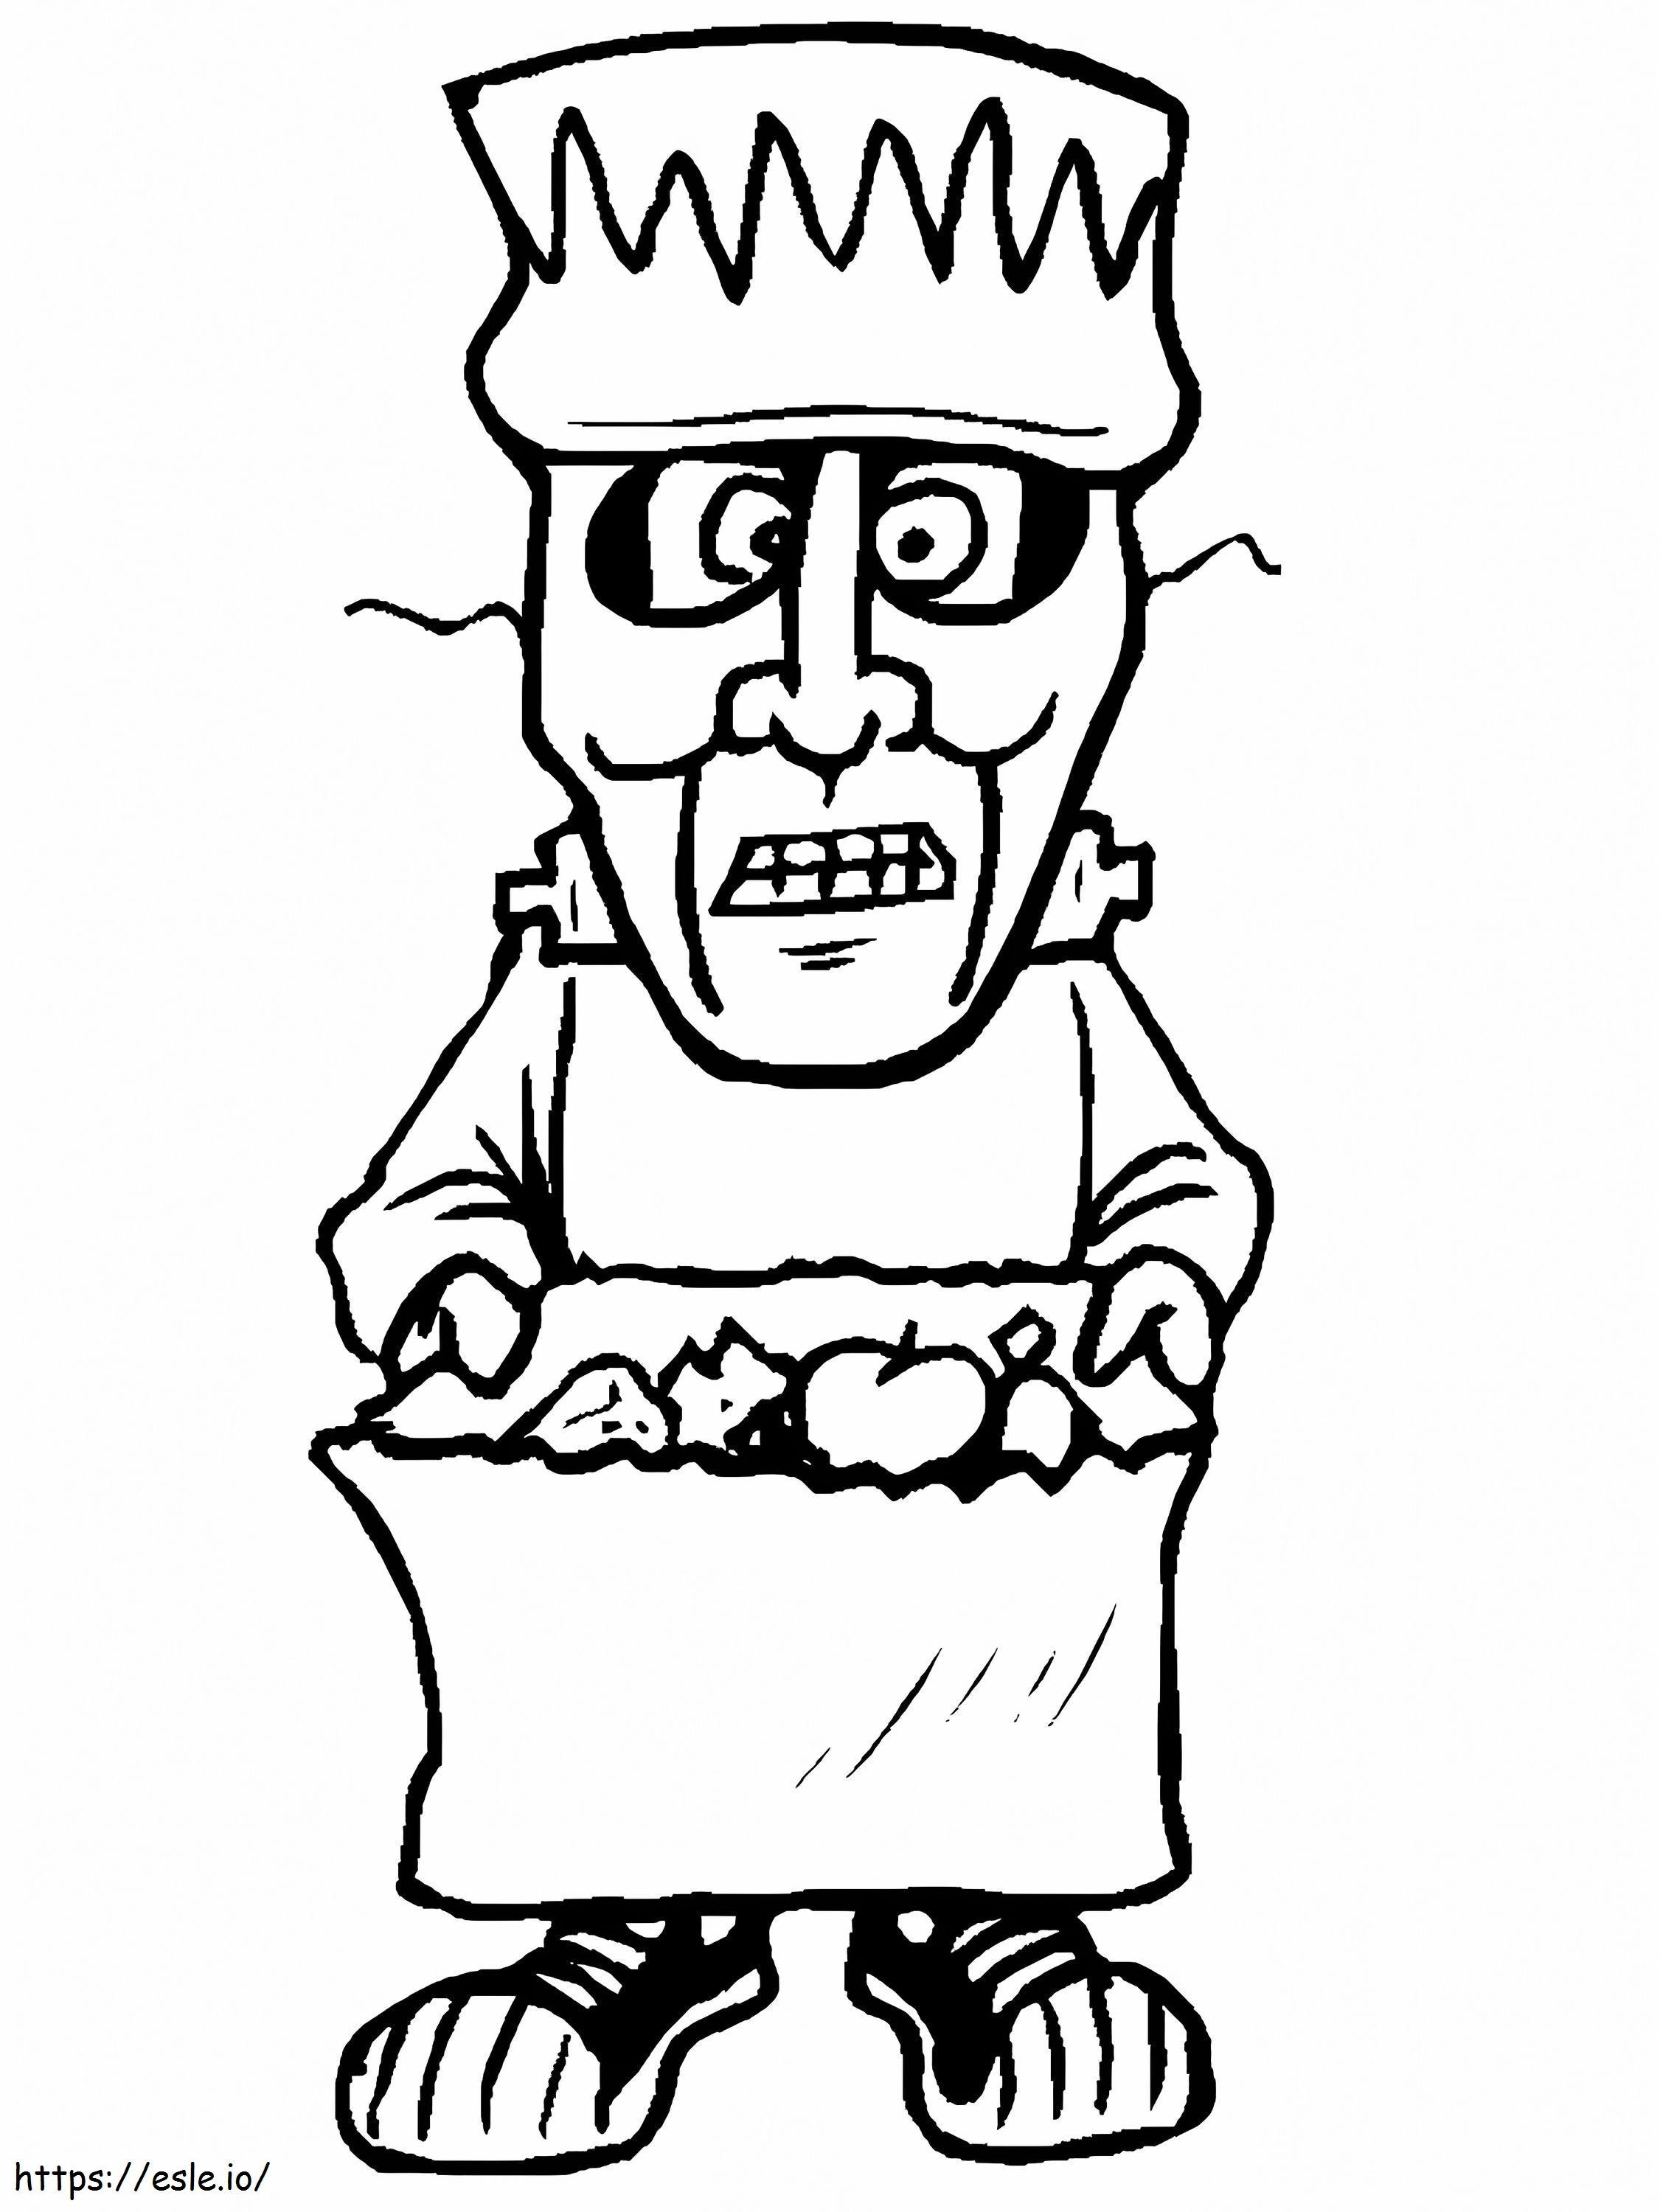 1539868048 Treater4 Halloween coloring page